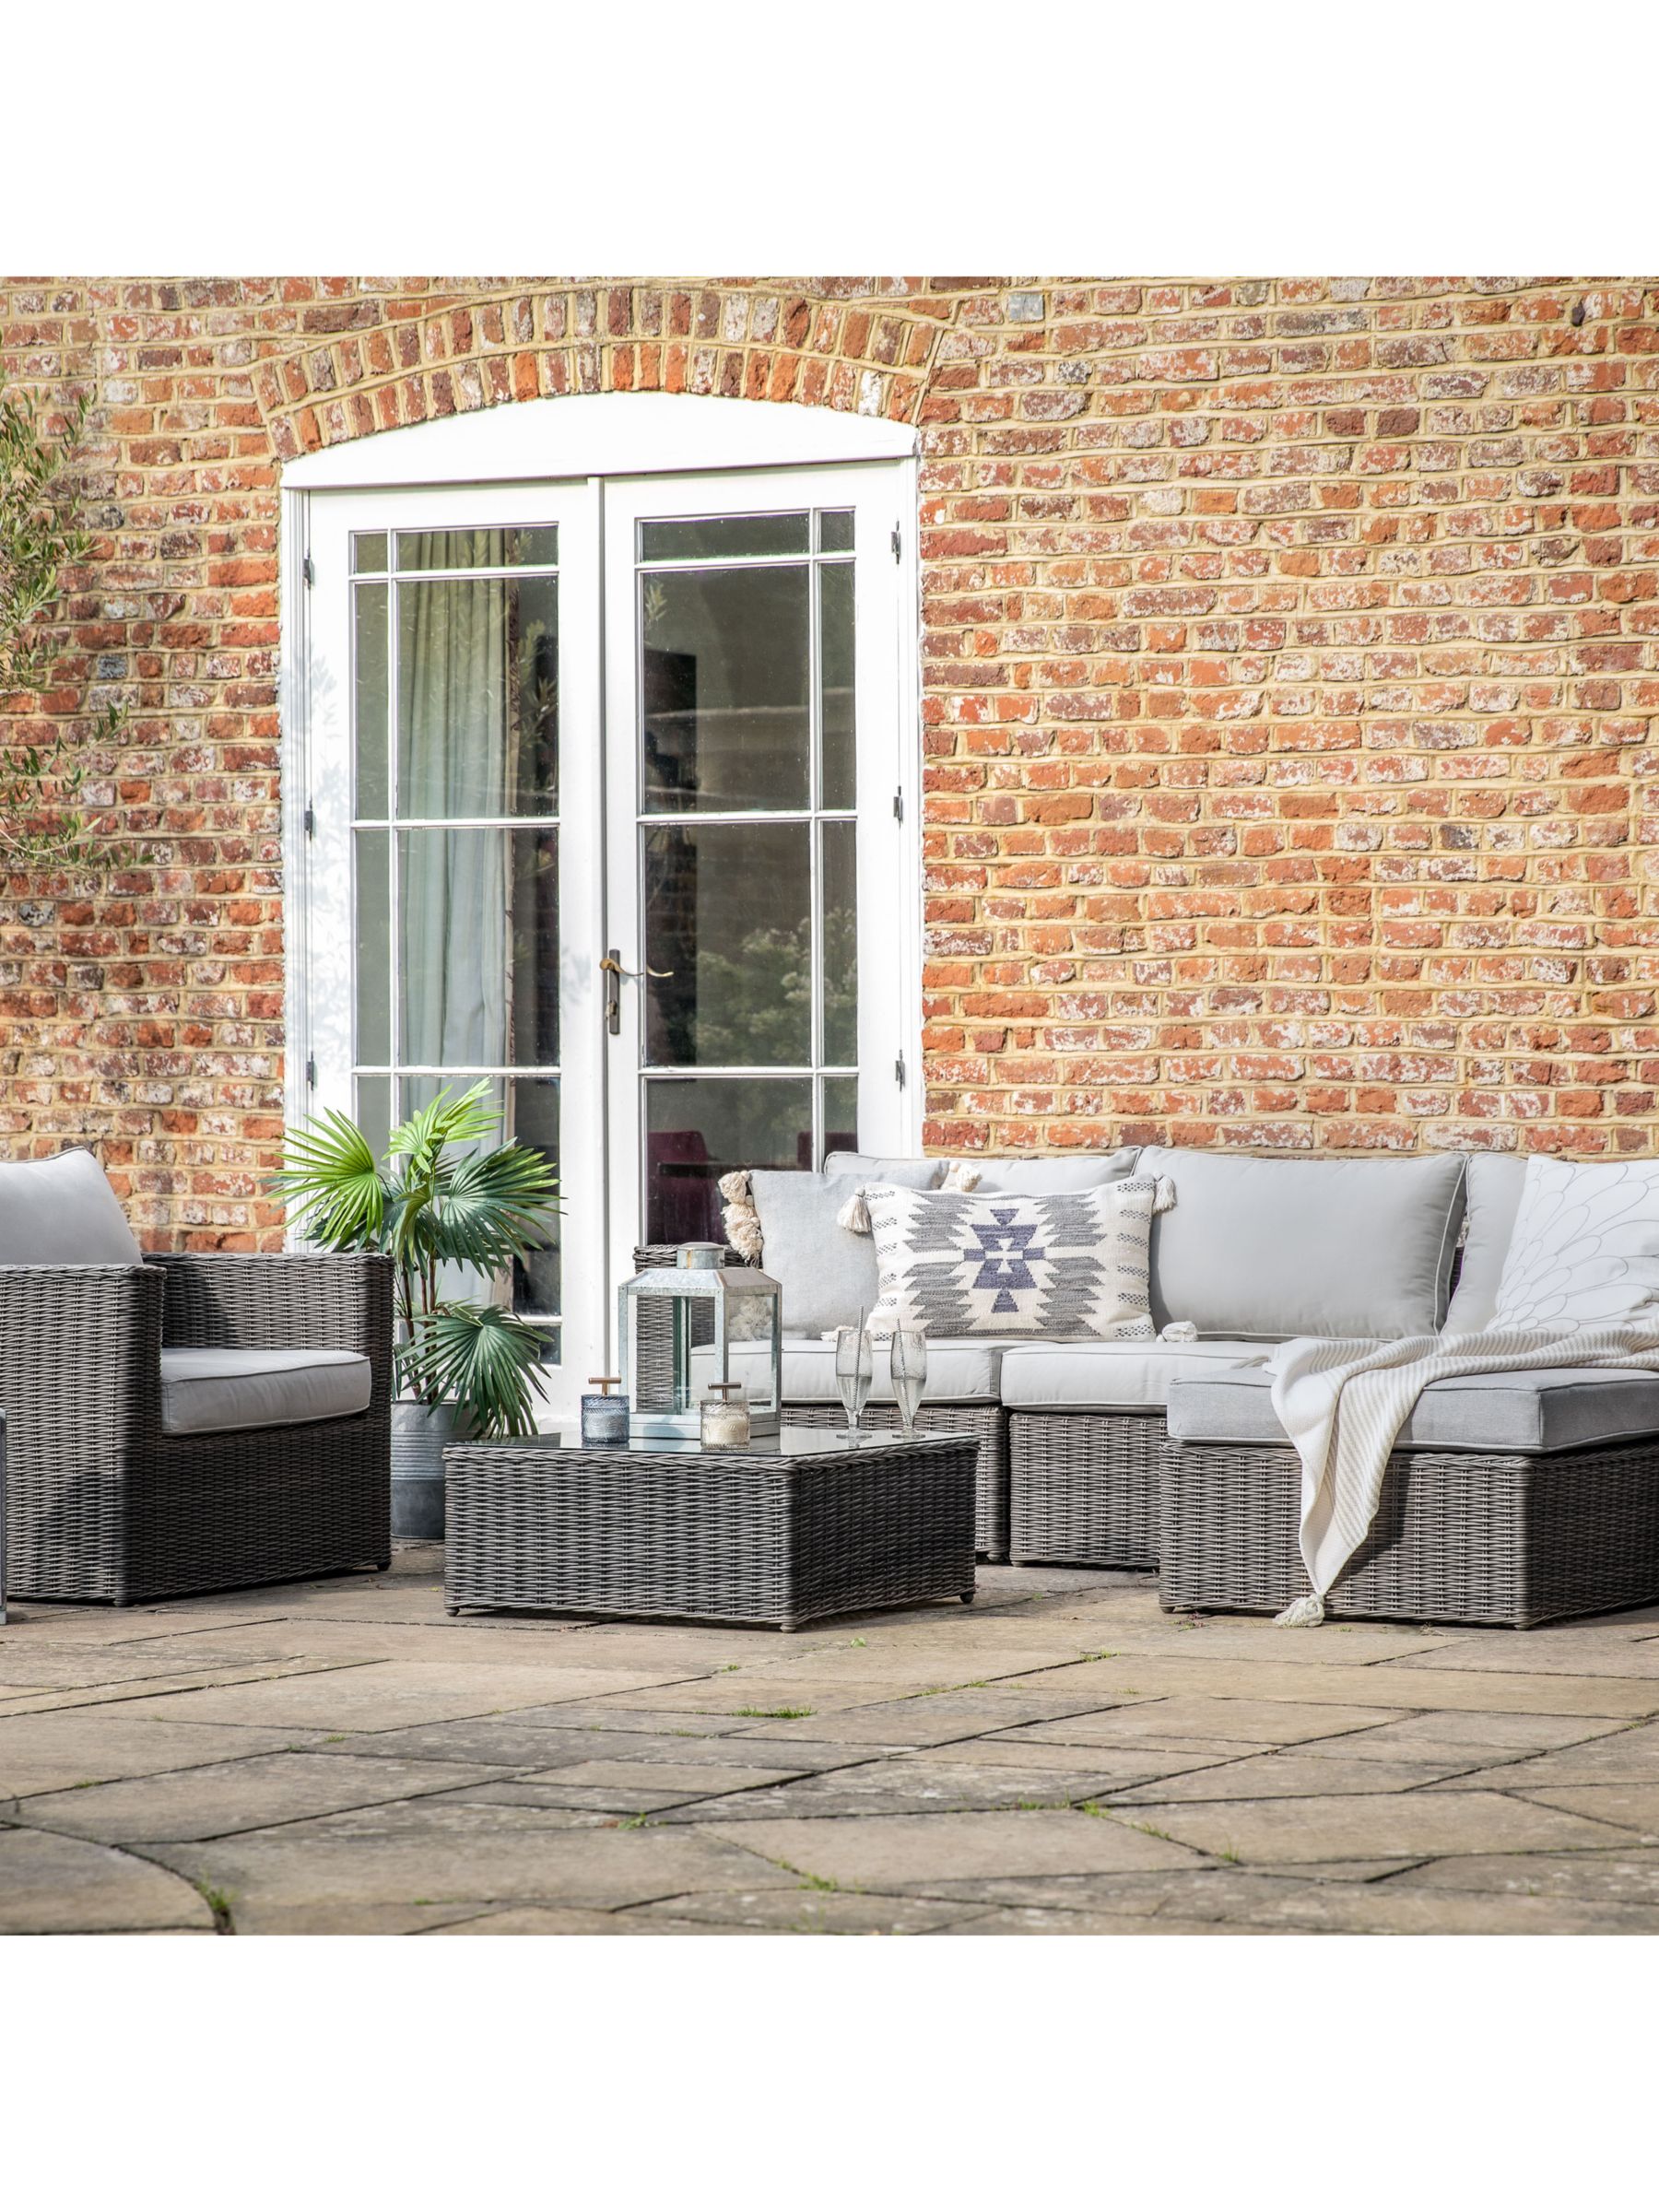 Photo of Gallery direct capri woven chaise sofa 4-seater garden lounging set